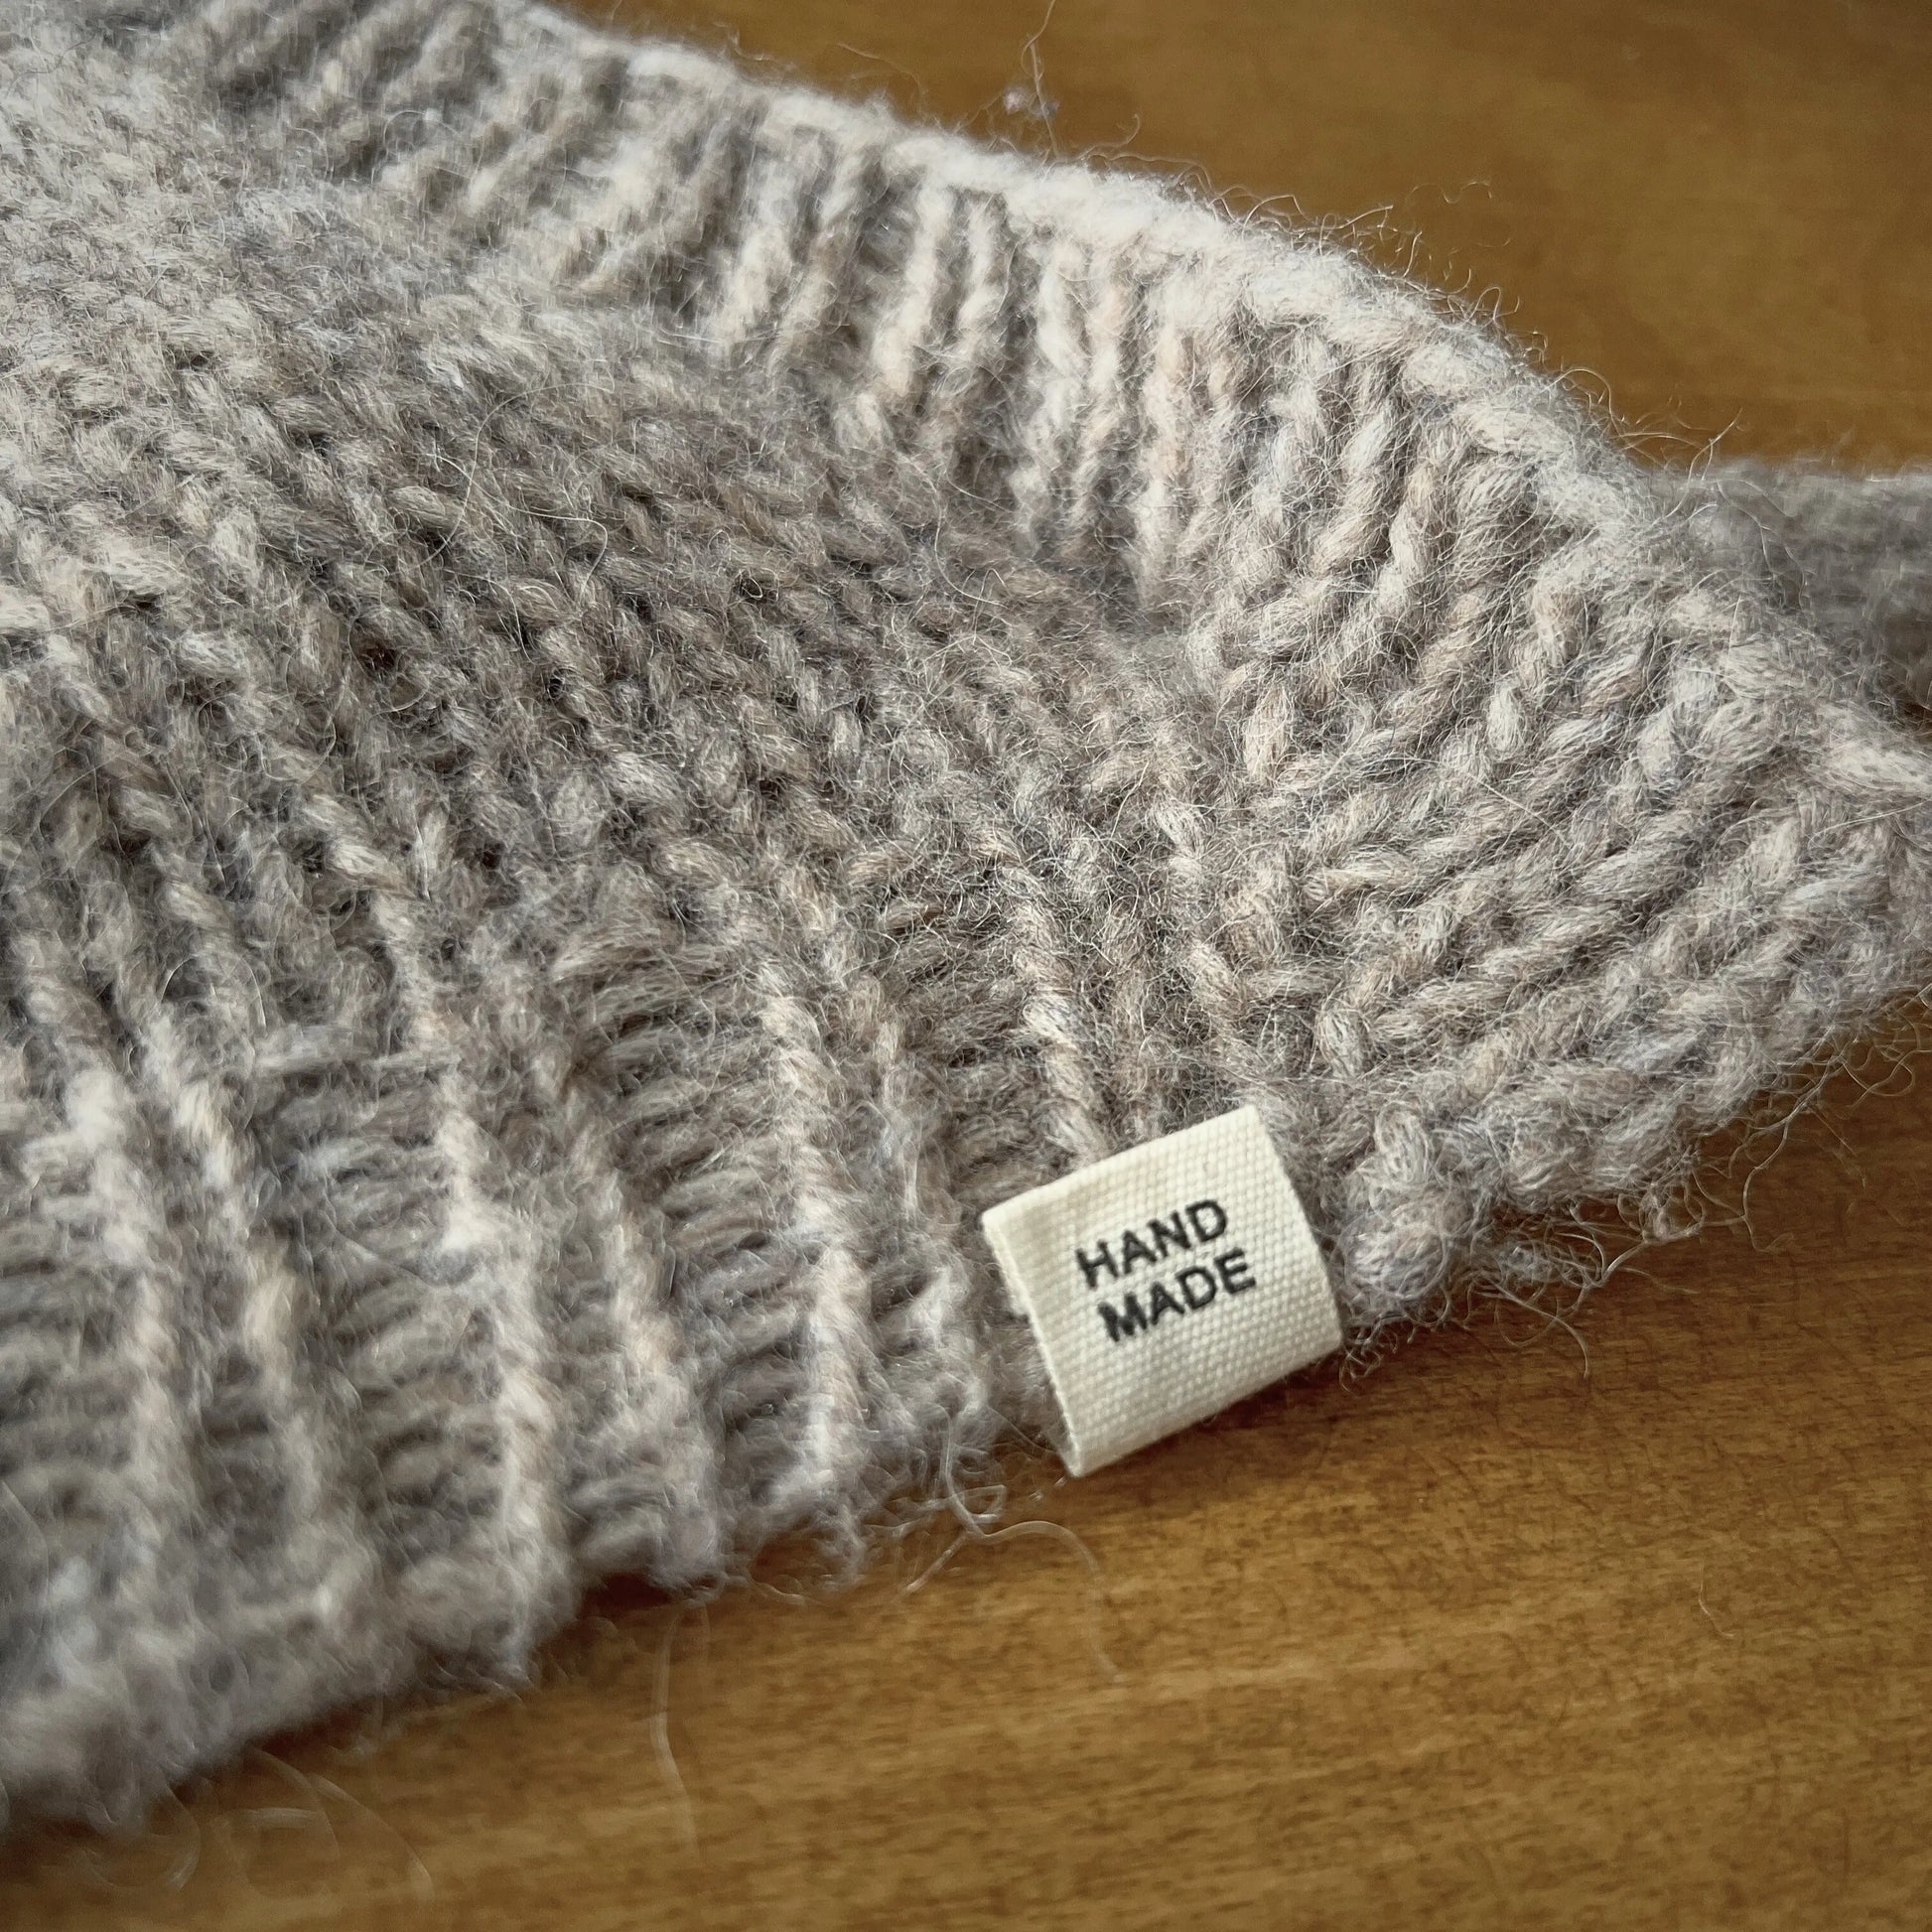 Cotton "hand made" tags KNITS by cindy ekman